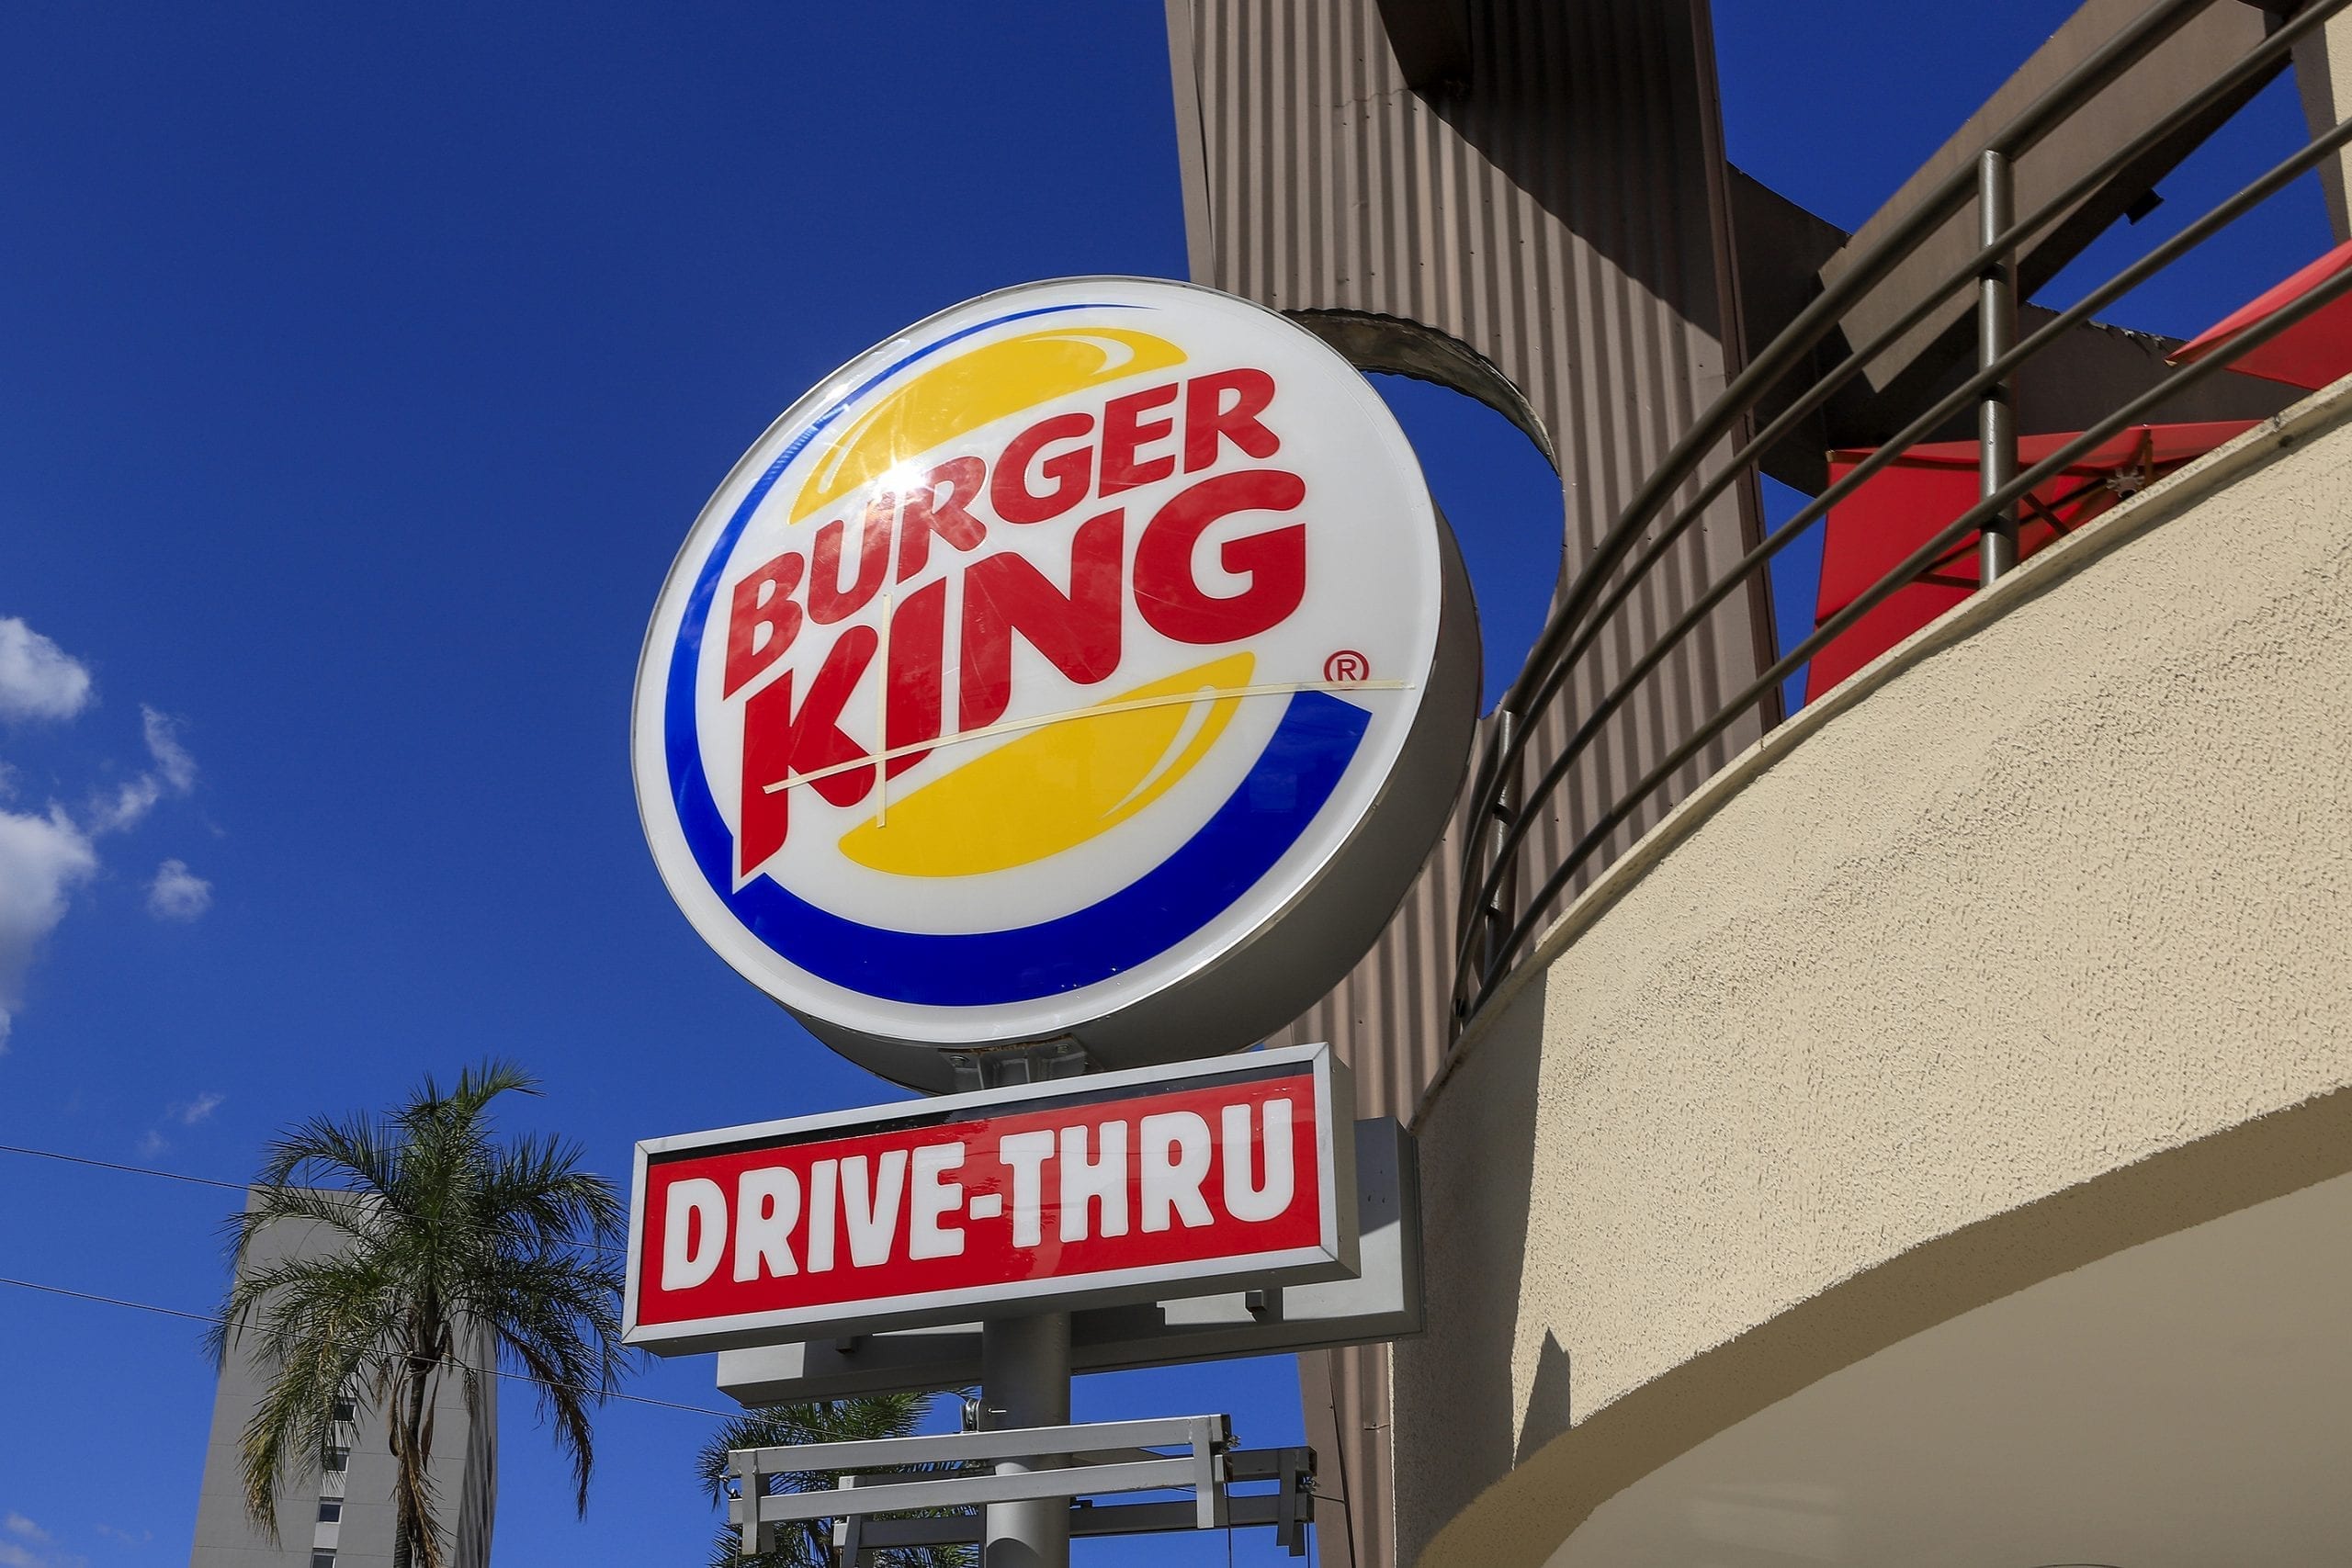 Tesla Autopilot Glitch Gives Birth to Burger King Ad Campaign